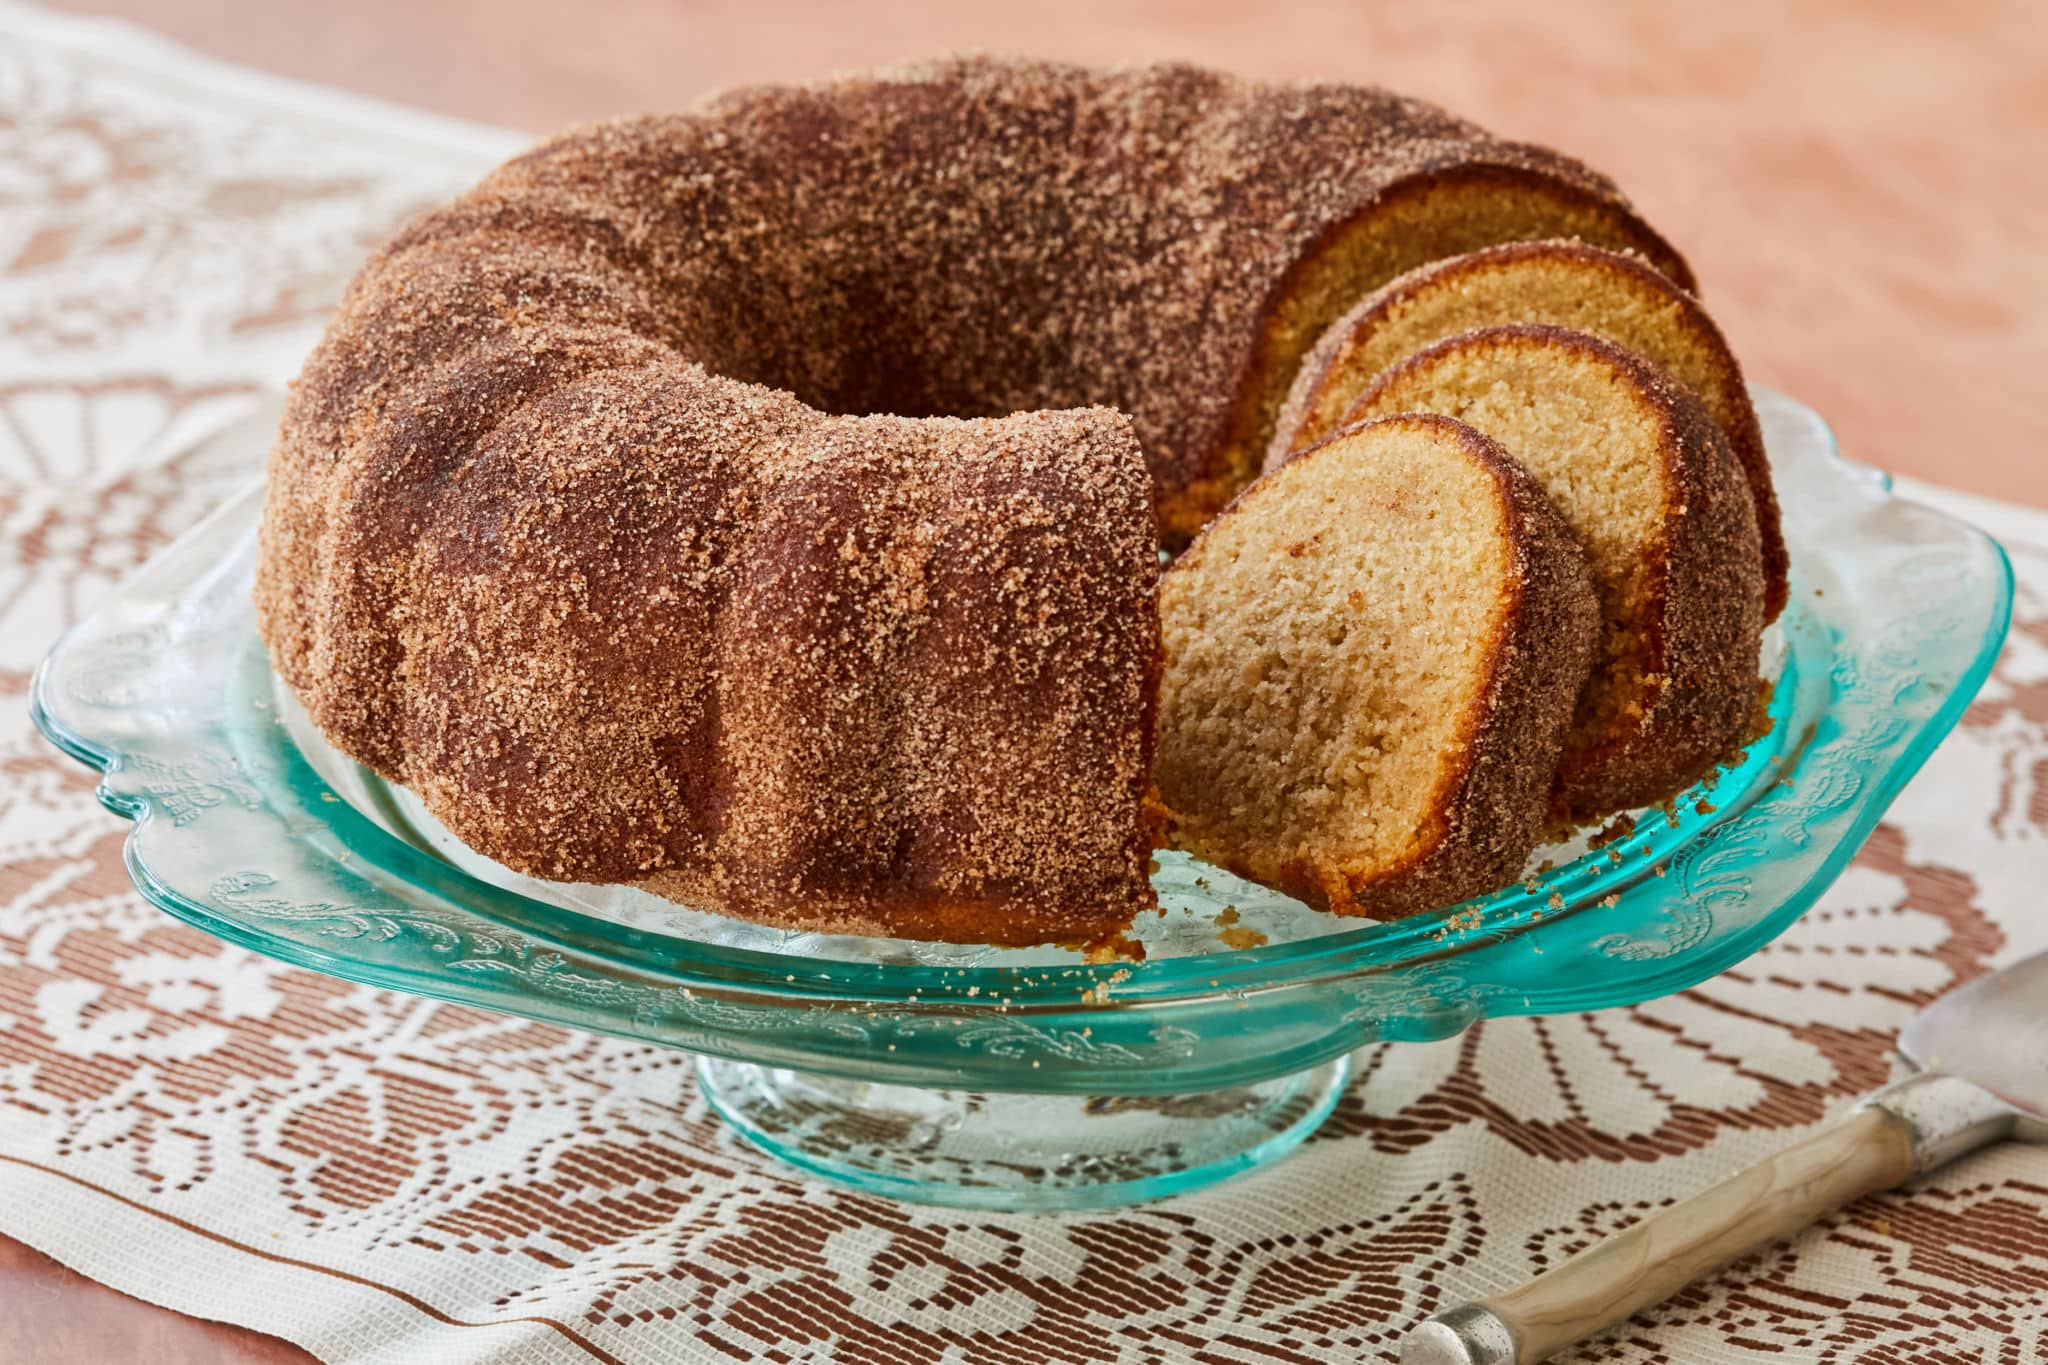 An apple cider donut cake covered in cinnamon sugar.